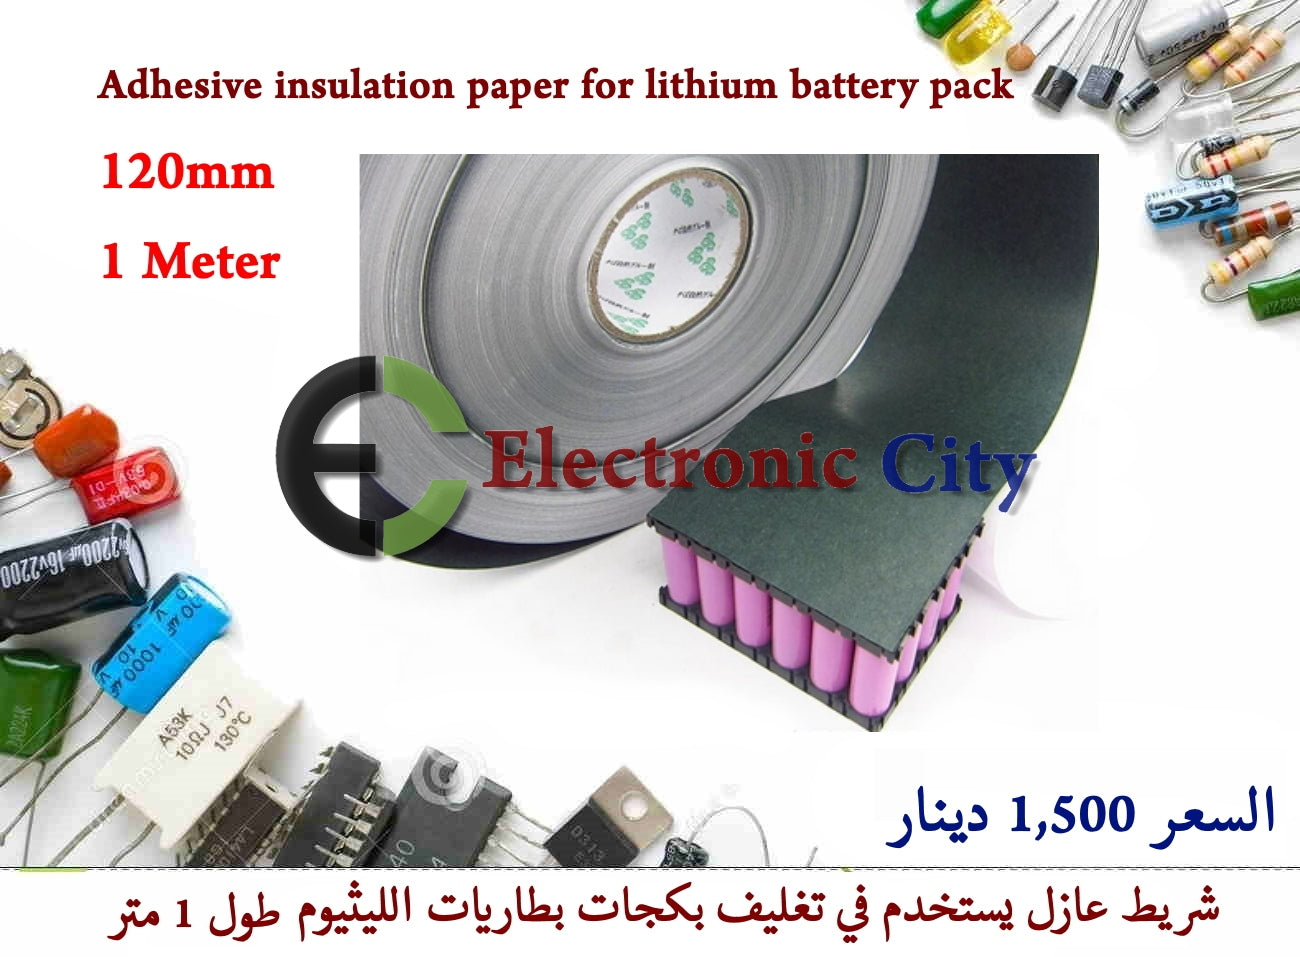 Adhesive insulation paper for lithium battery pack 120mm 1M